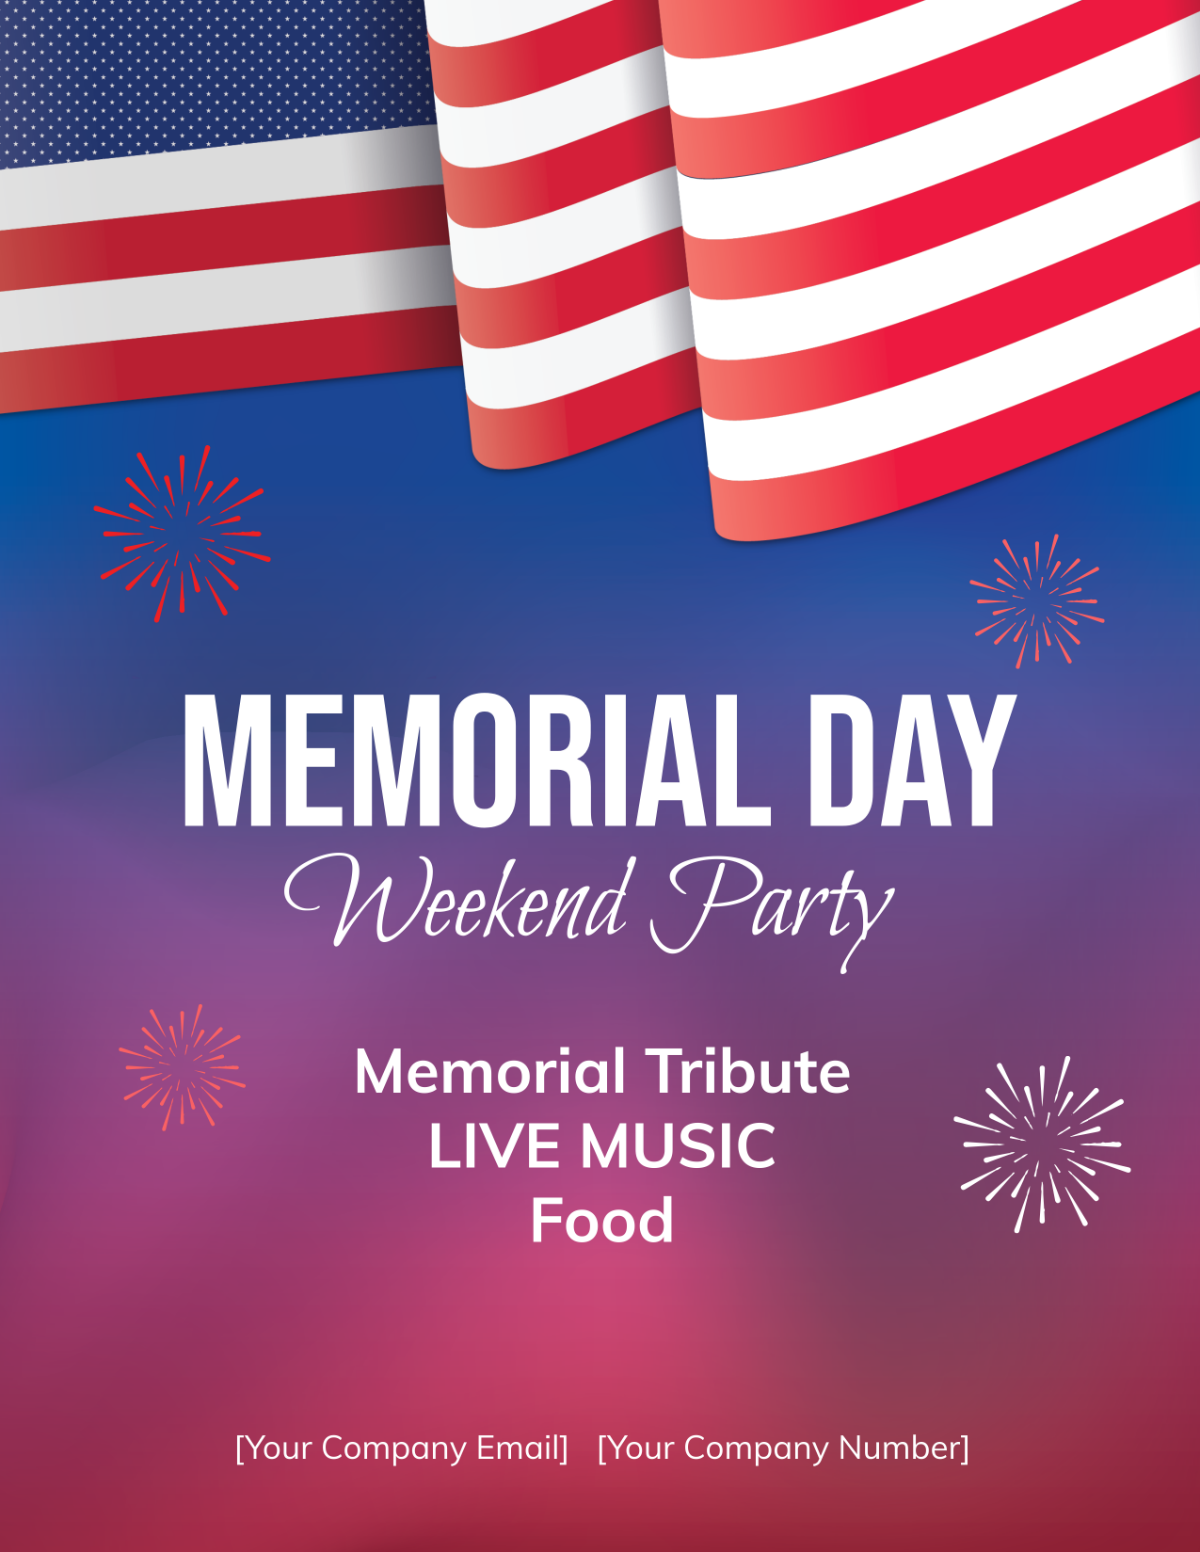 Memorial Day Weekend Party Flyer Template